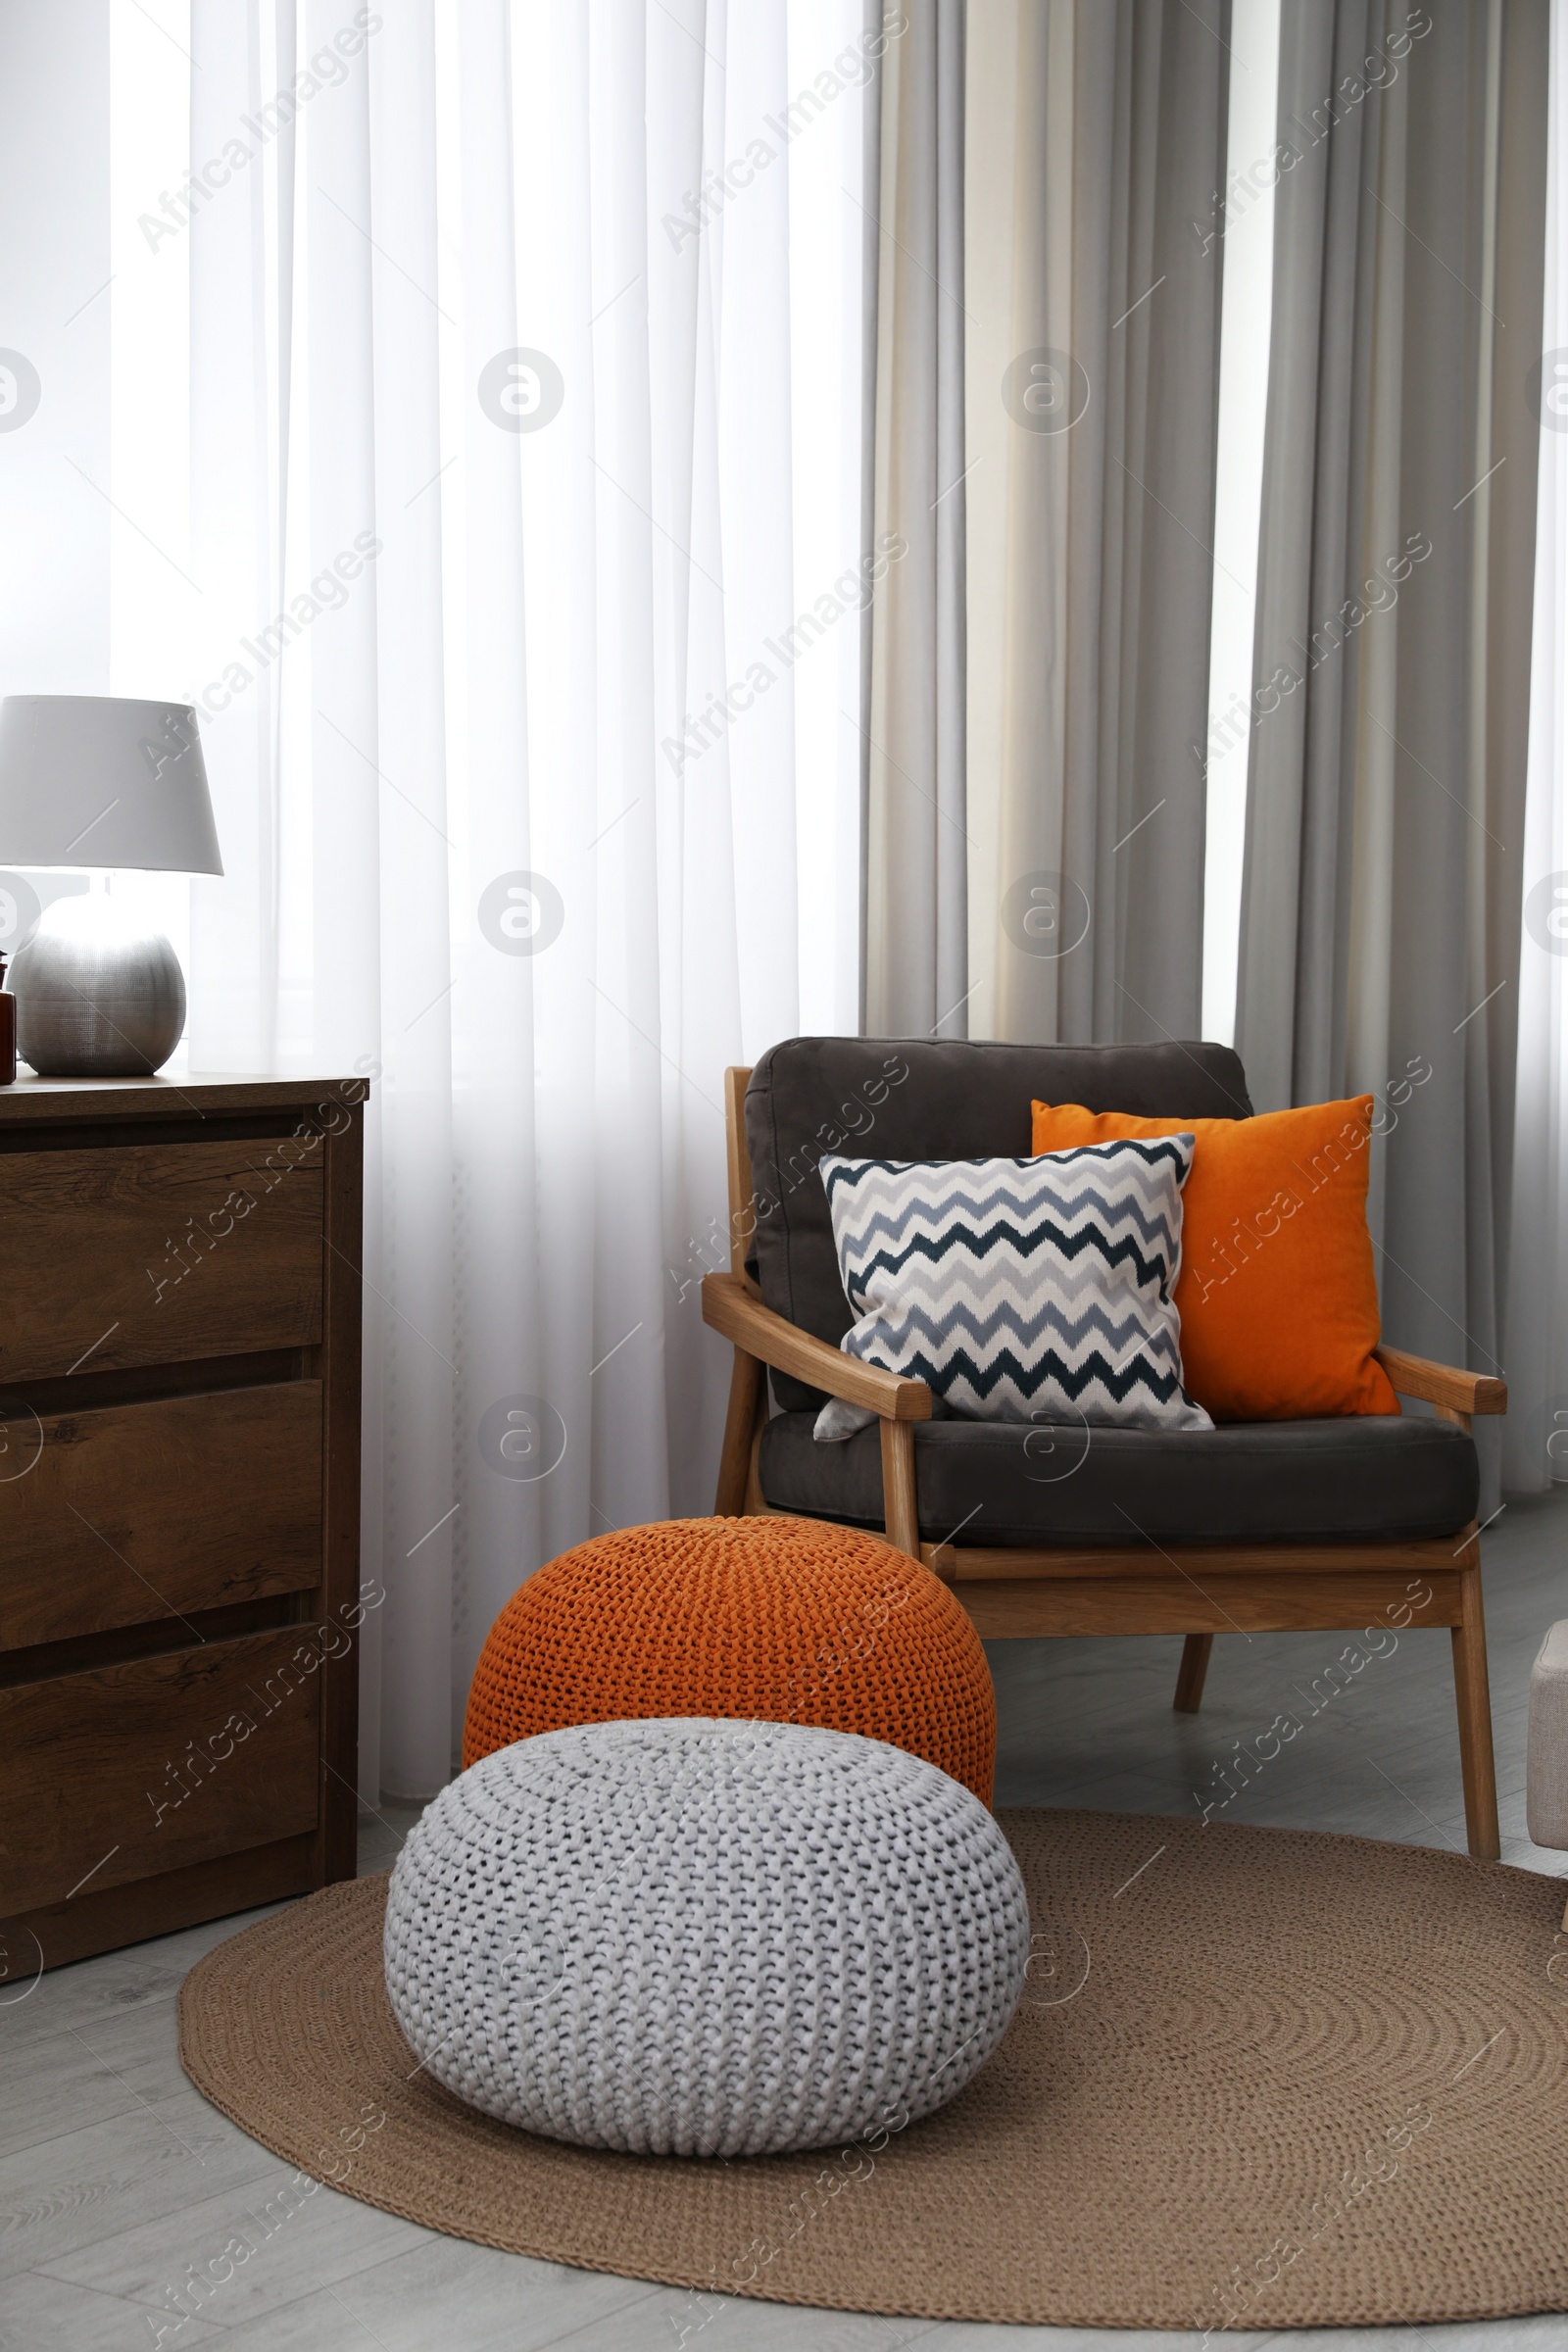 Photo of Stylish comfortable poufs near armchair in room. Home design